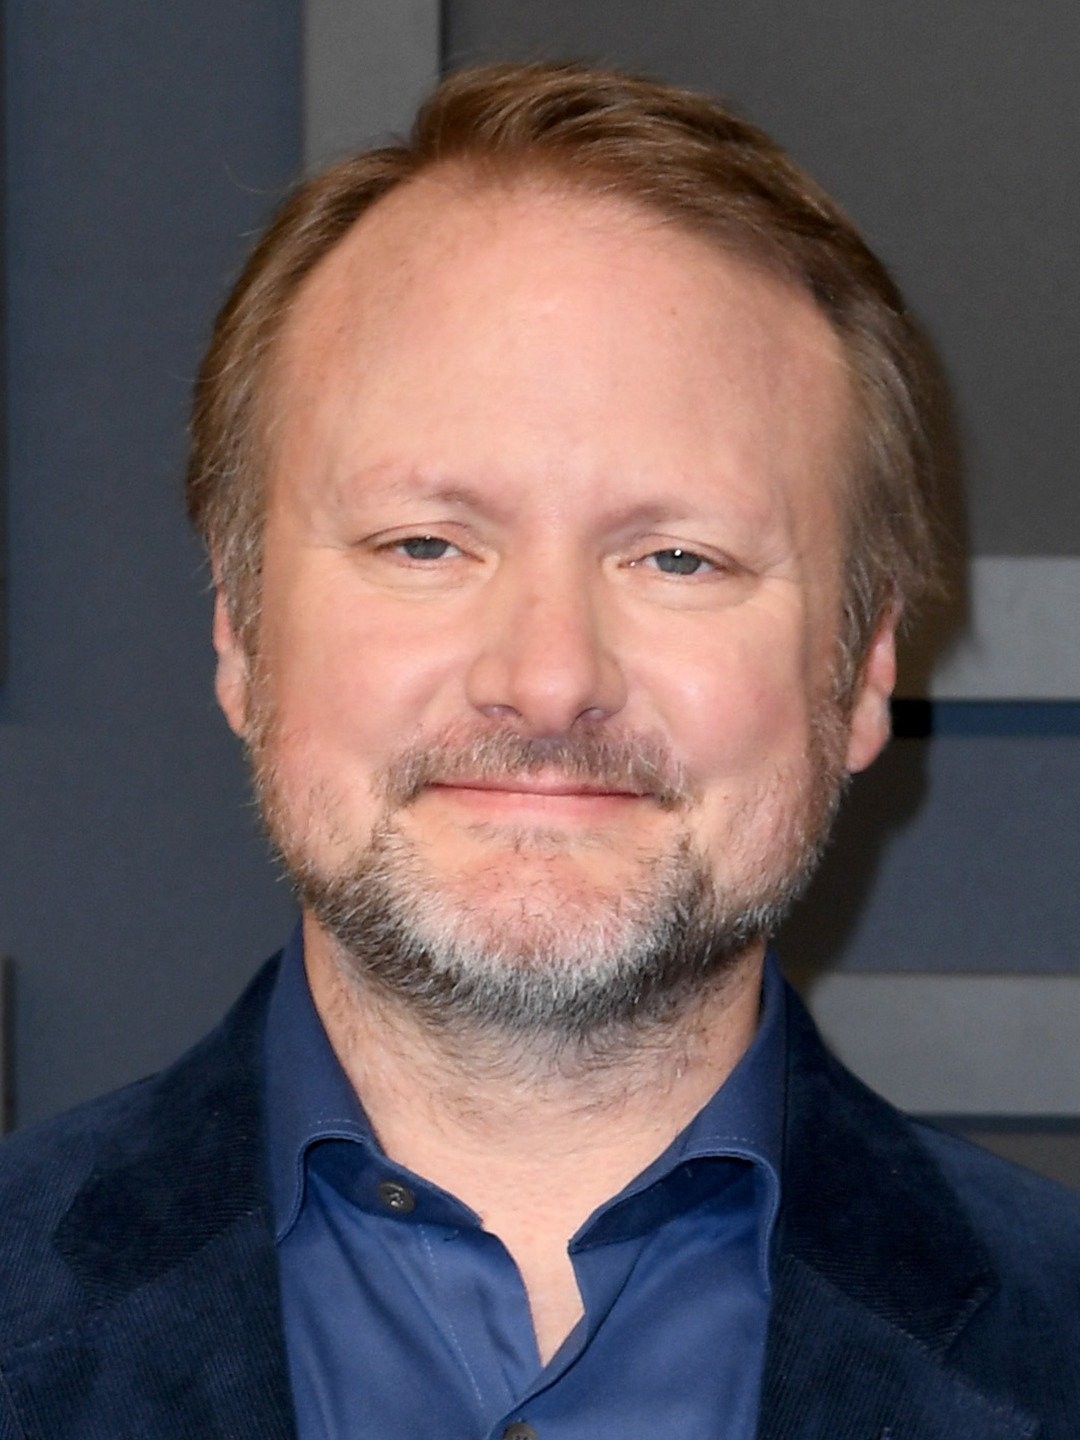 Star Wars Director Rian Johnson Has An Interesting Theory For The